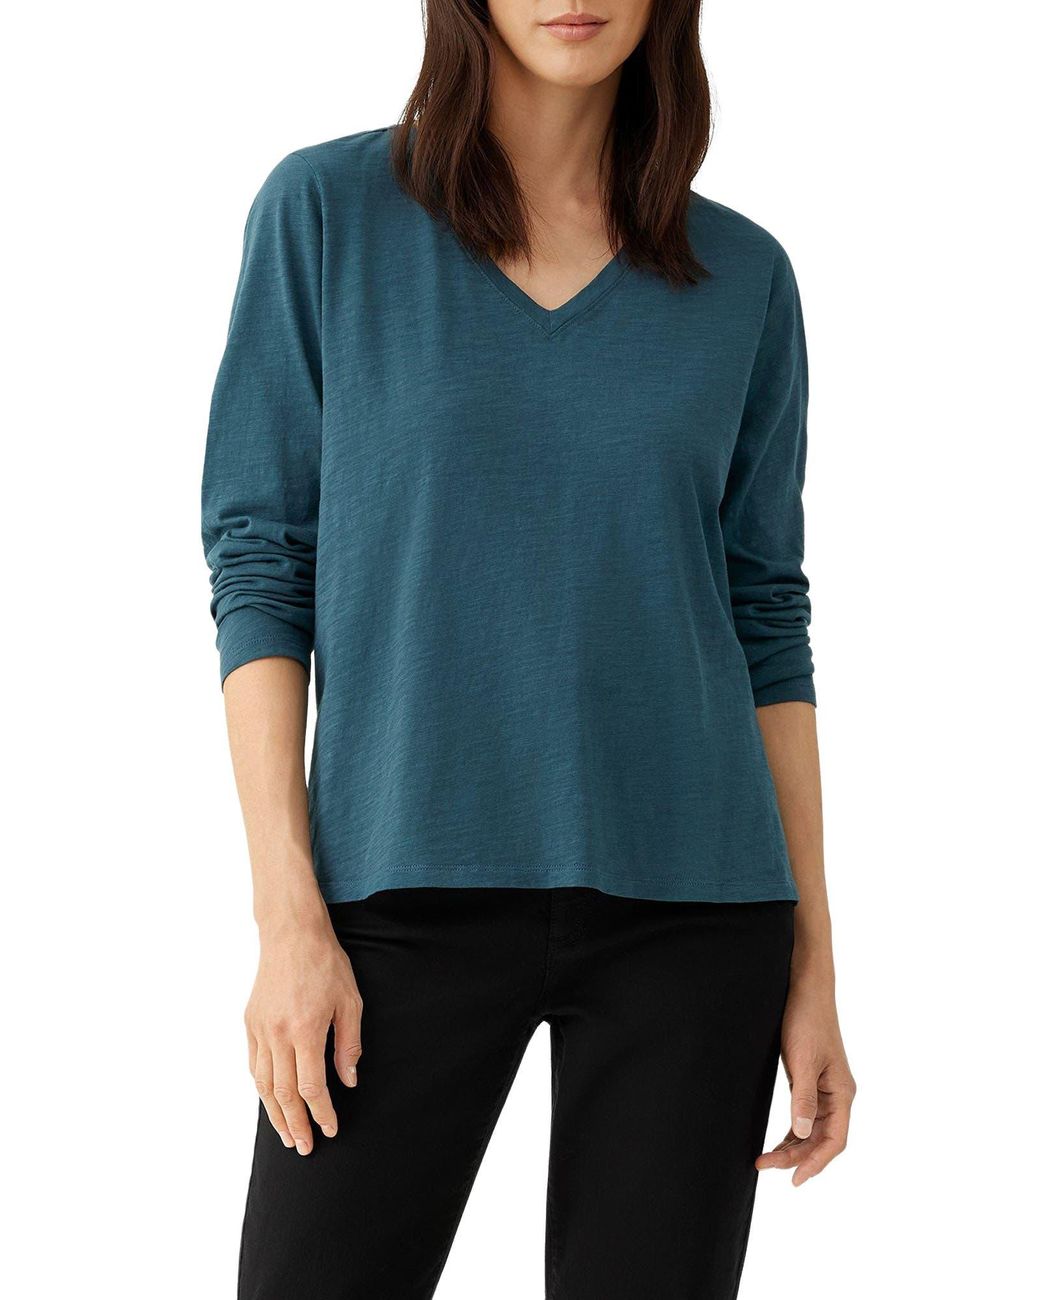 Eileen Fisher…simple goes with everything